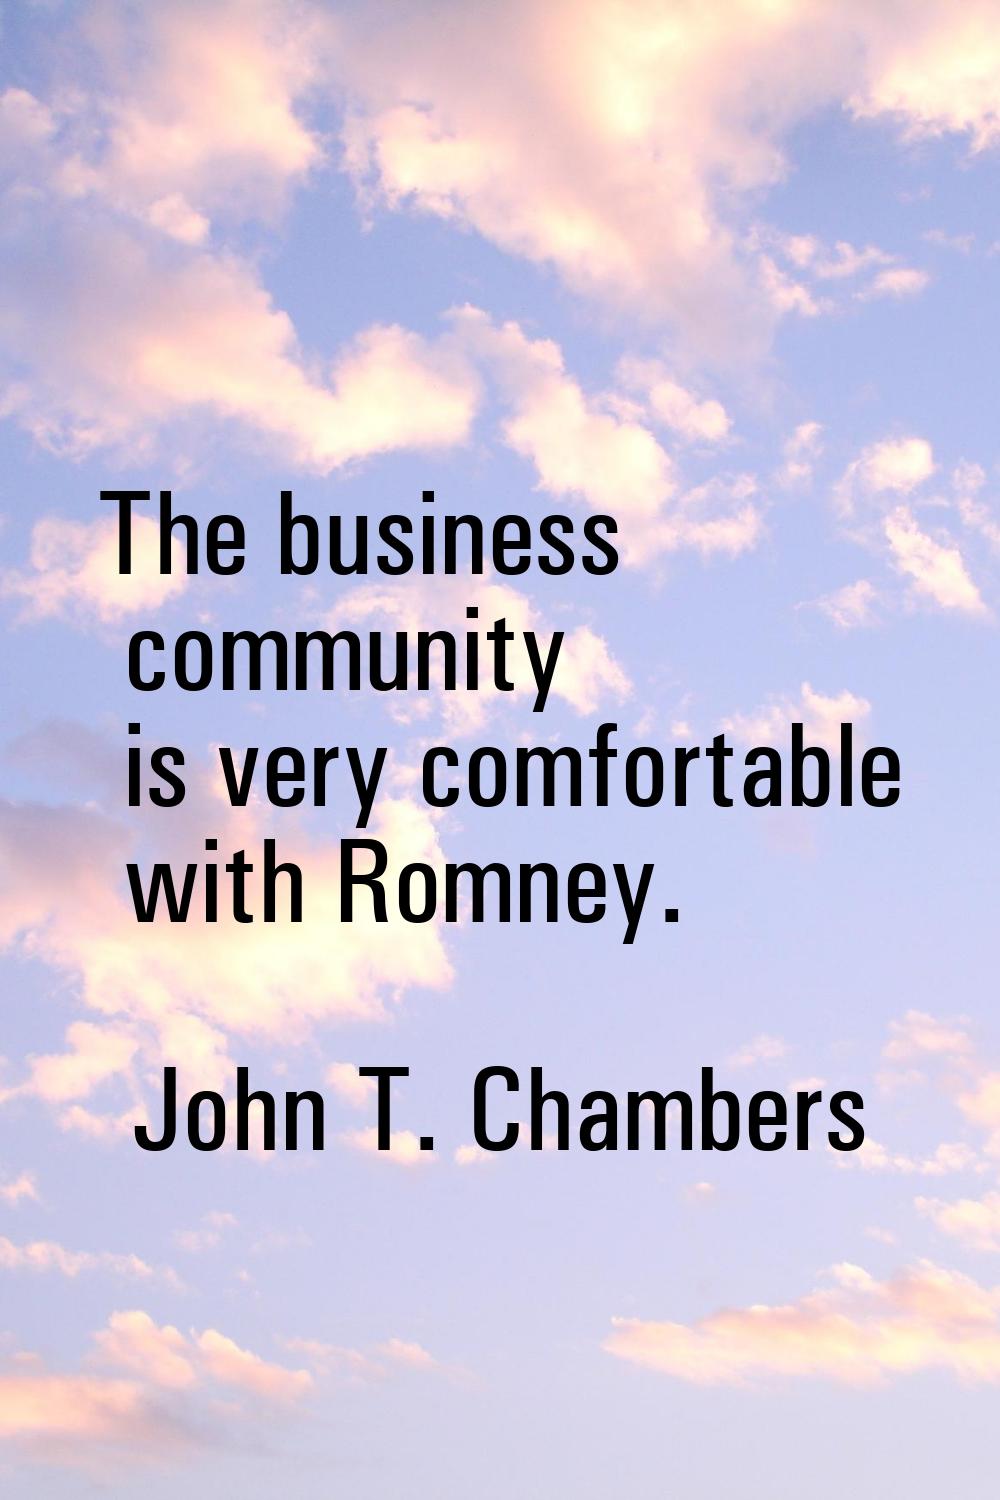 The business community is very comfortable with Romney.